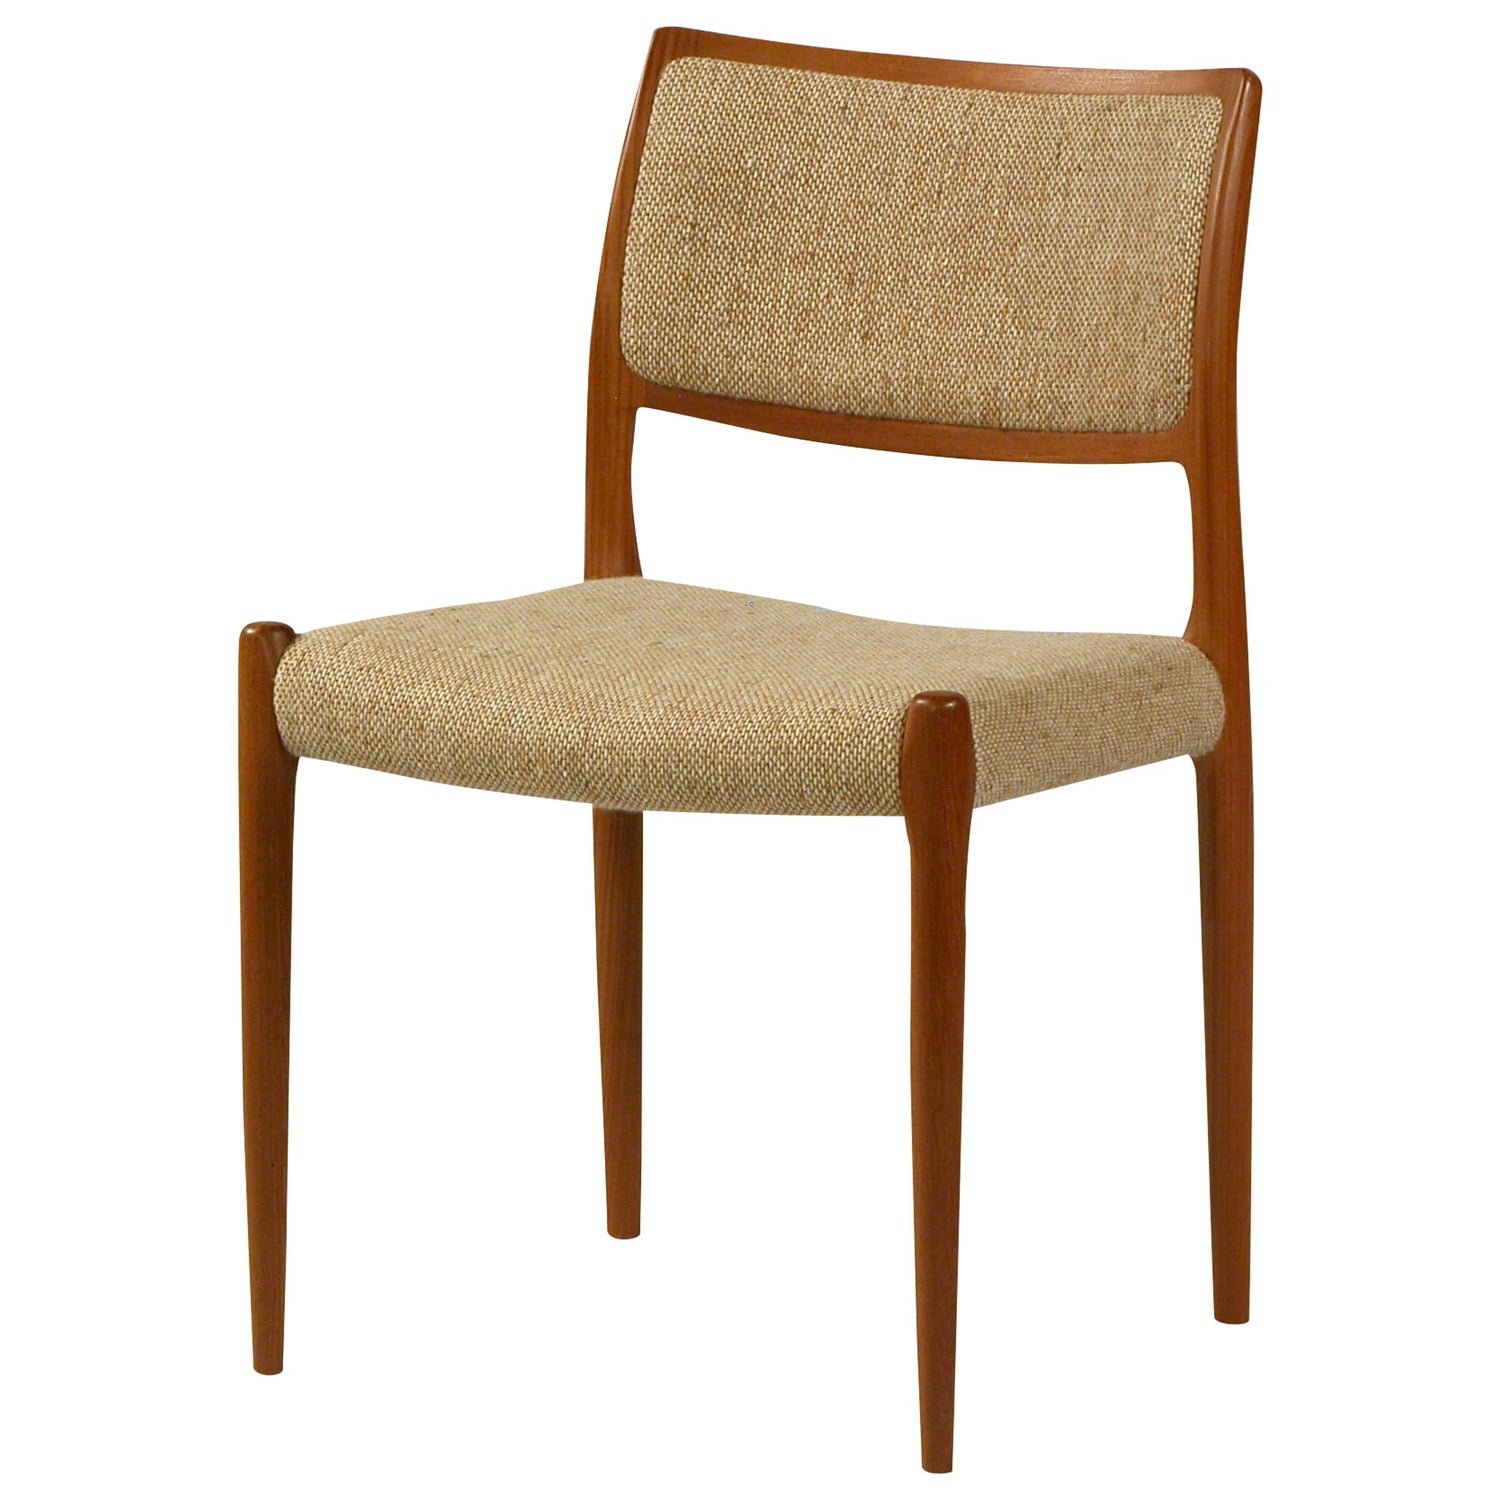 1960s Model 80 Teak Dining Chair by Niels Otto Møller For Sale at 1stDibs